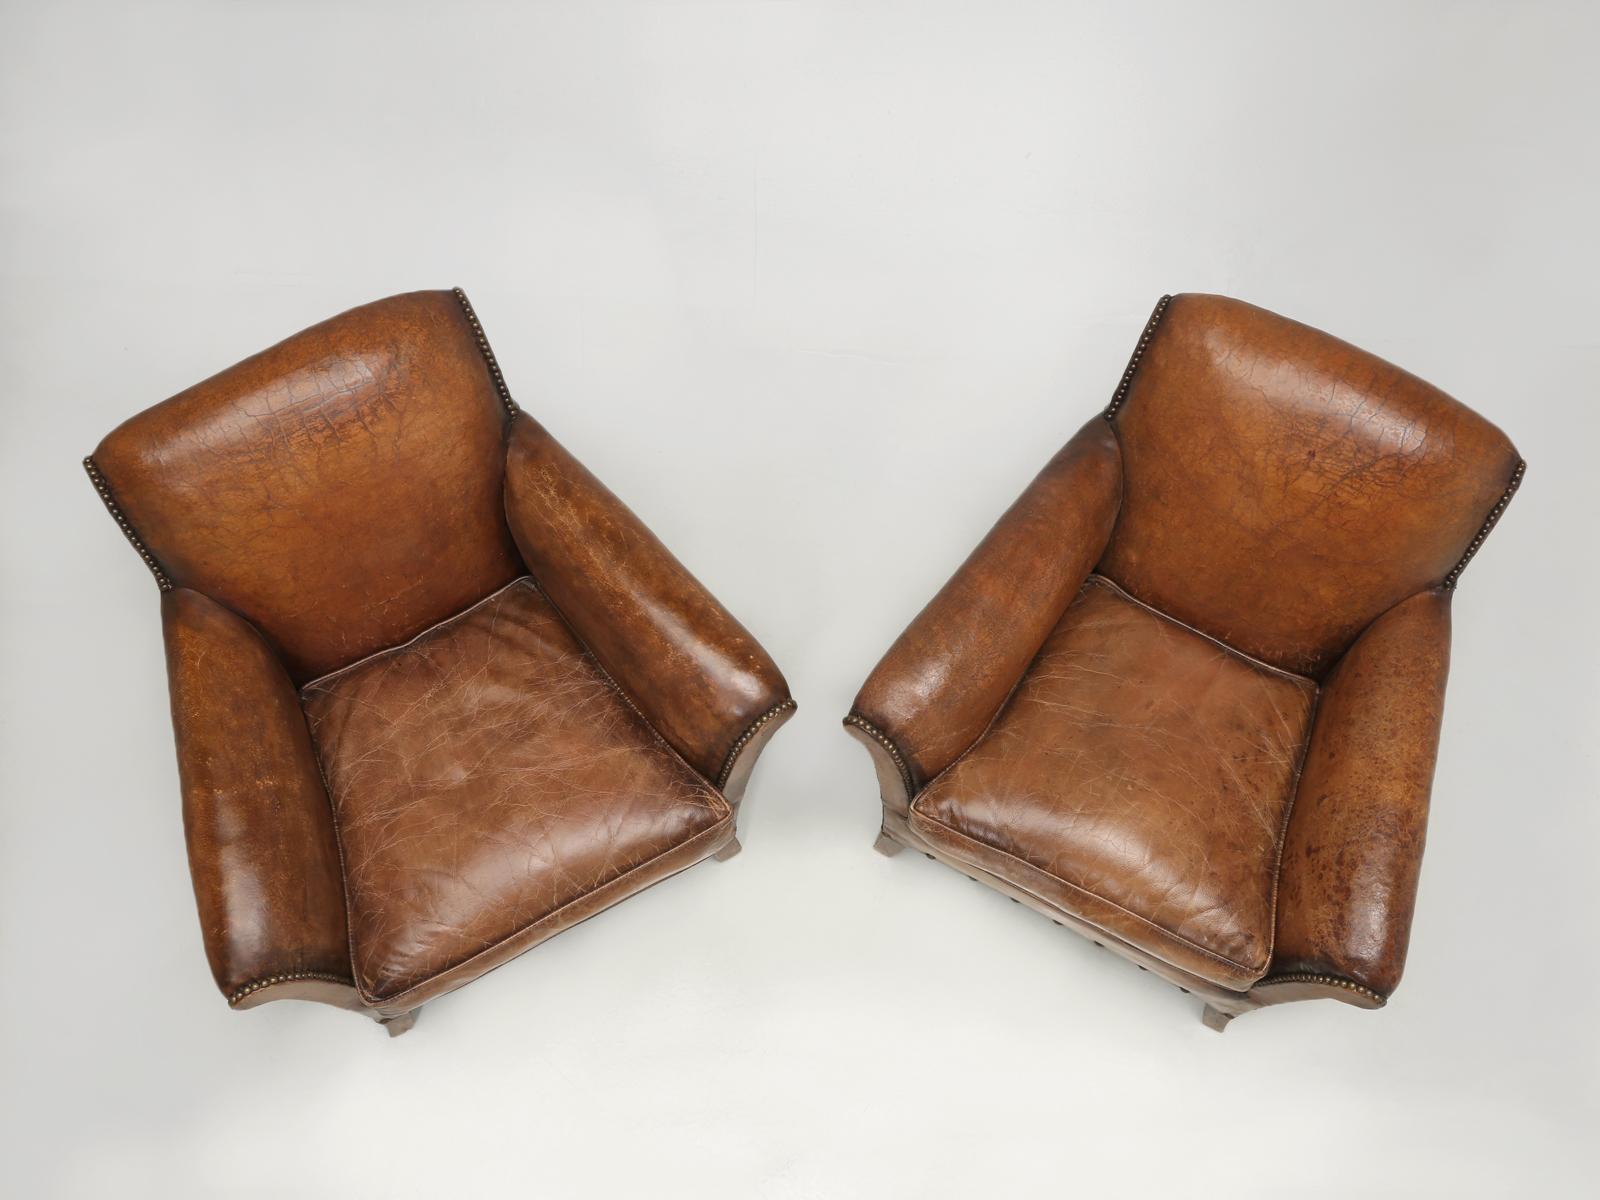 French Art Deco Pair Leather Club Chairs Restored Internally to a High Standard 3